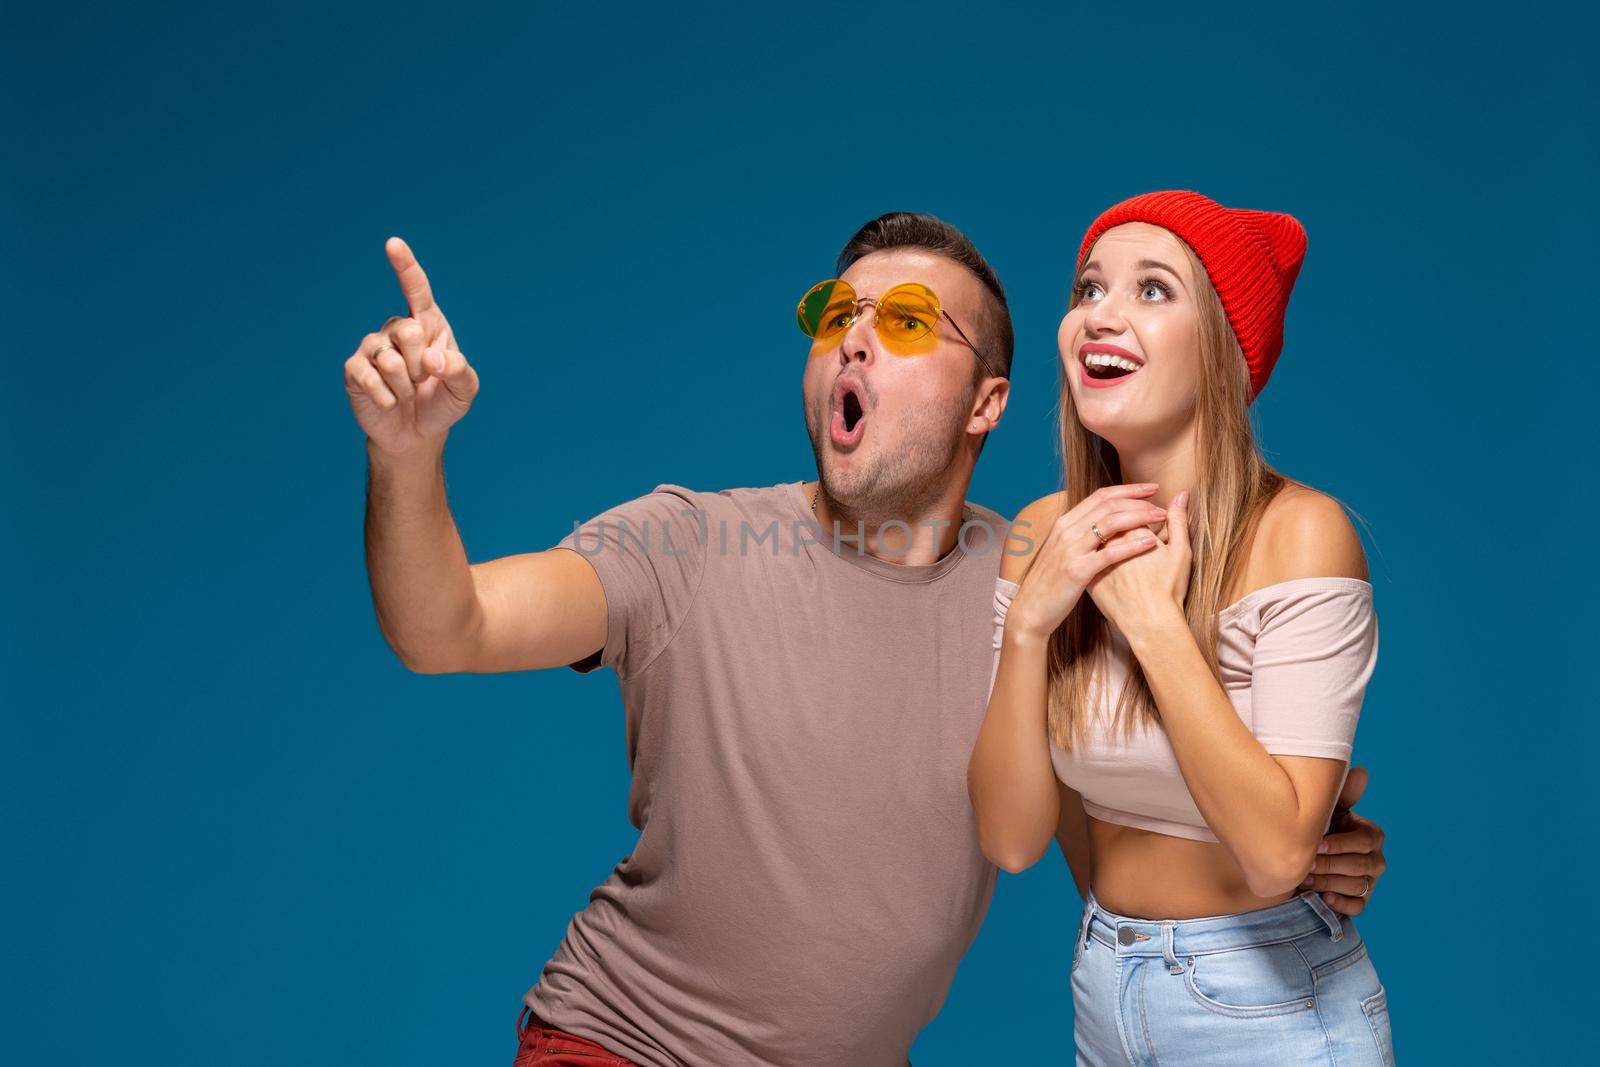 Surprised couple in casual clothes pointing with their index fingers up looking there with great astonishment isolated over blue background with copy space for your advertisement or written text.